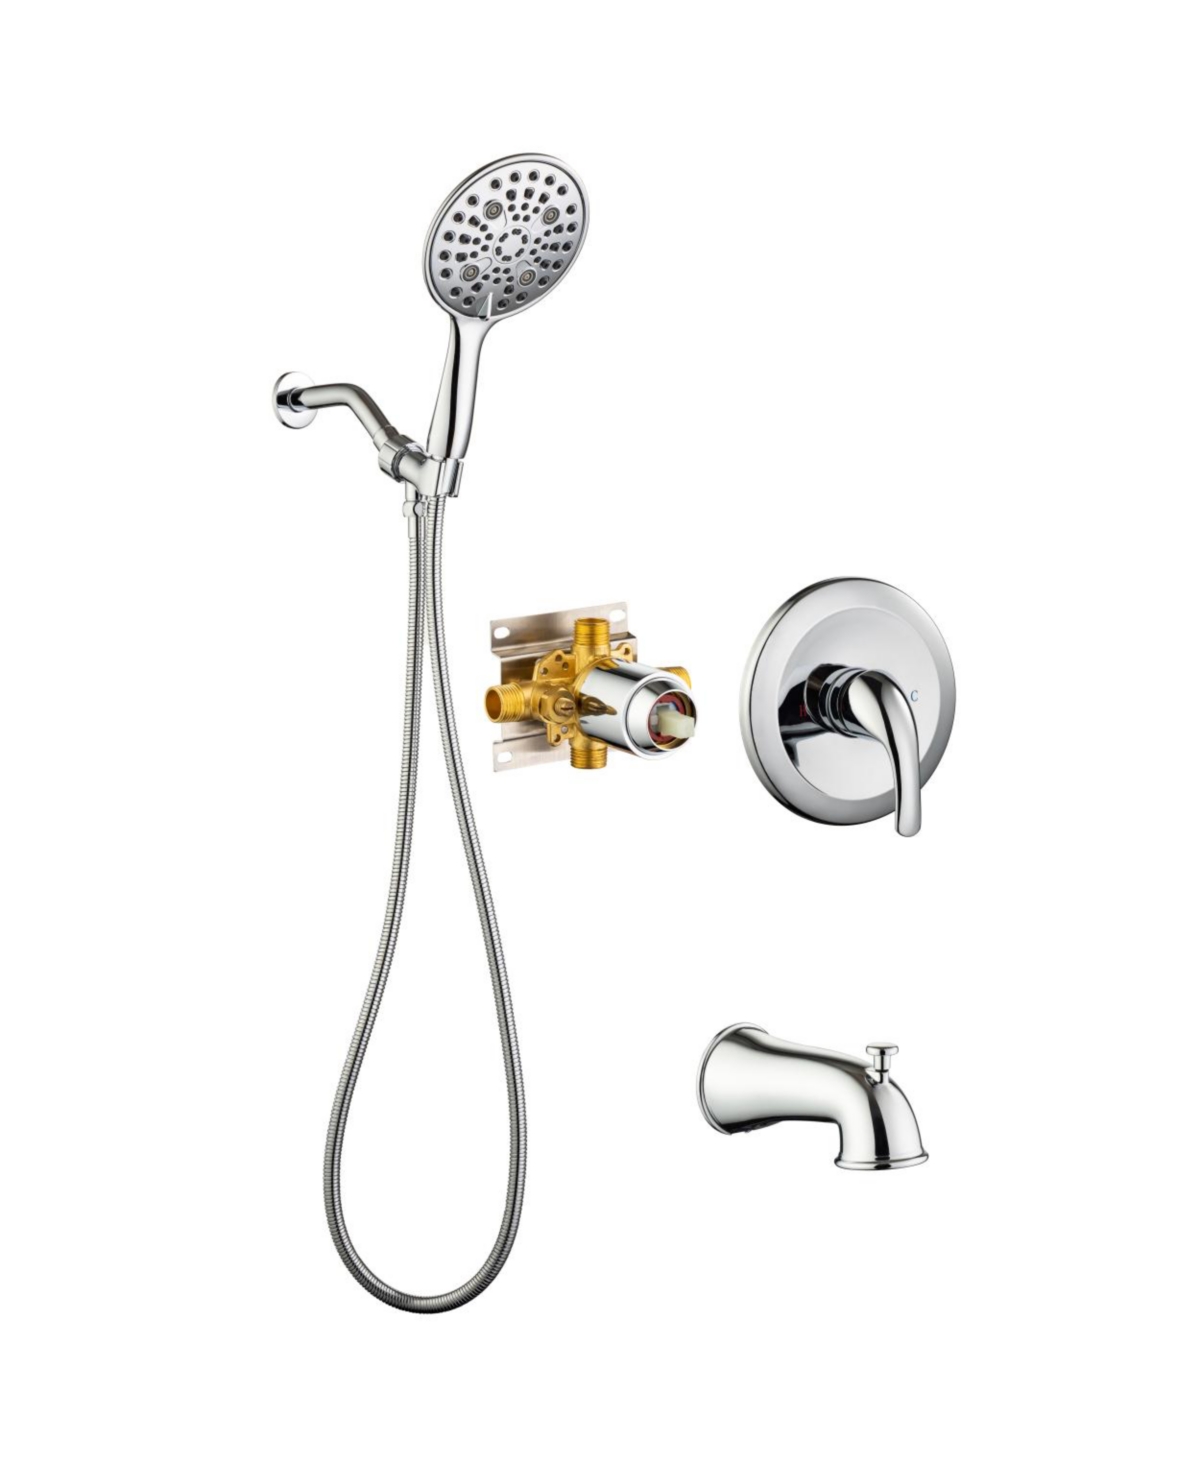 6 In. Detachable Handheld Shower Head Shower Faucet Shower System 002 - Silver